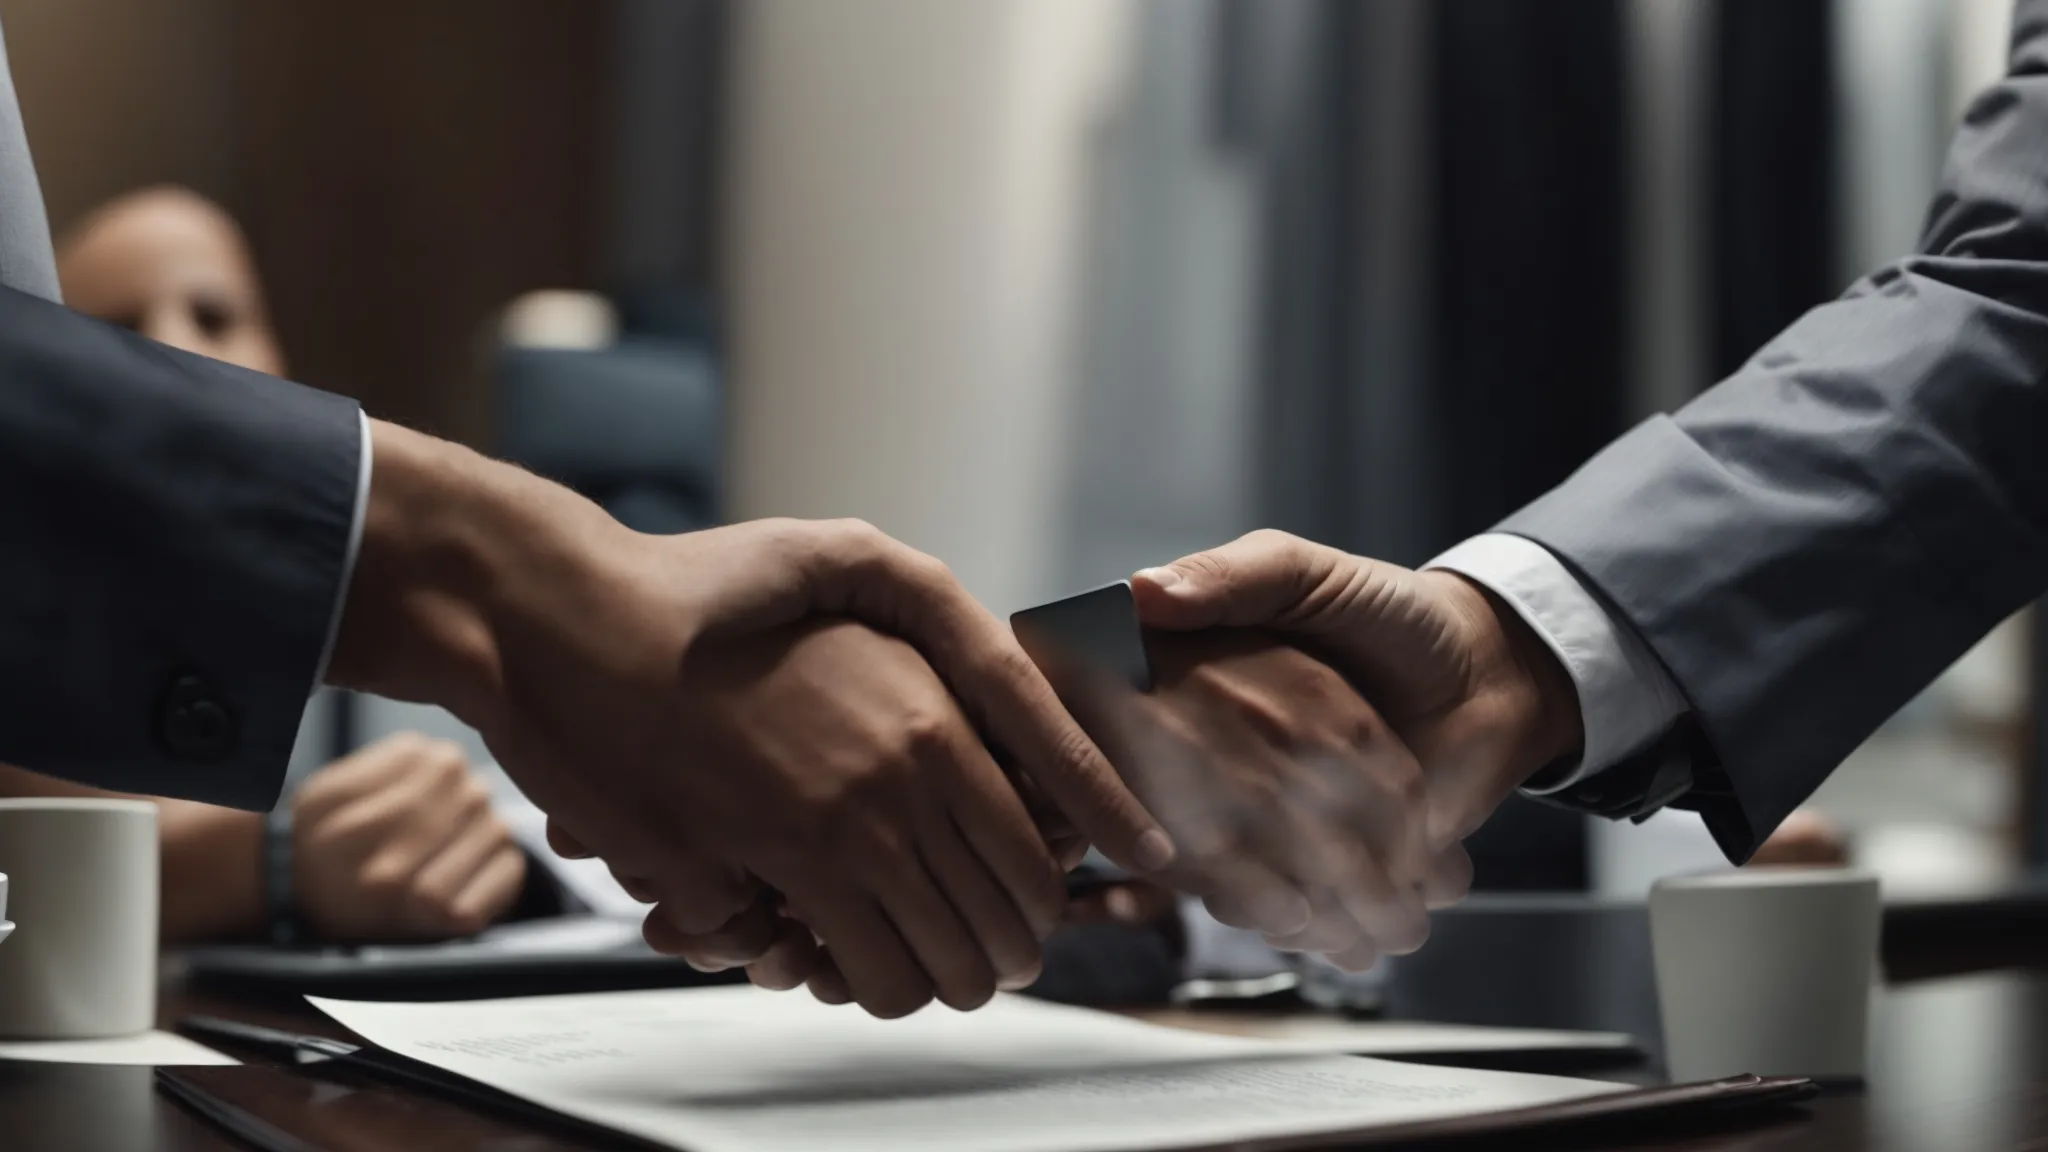 two business professionals shake hands over a table, with documents and digital devices in front of them, symbolizing the initiation of a partnership.